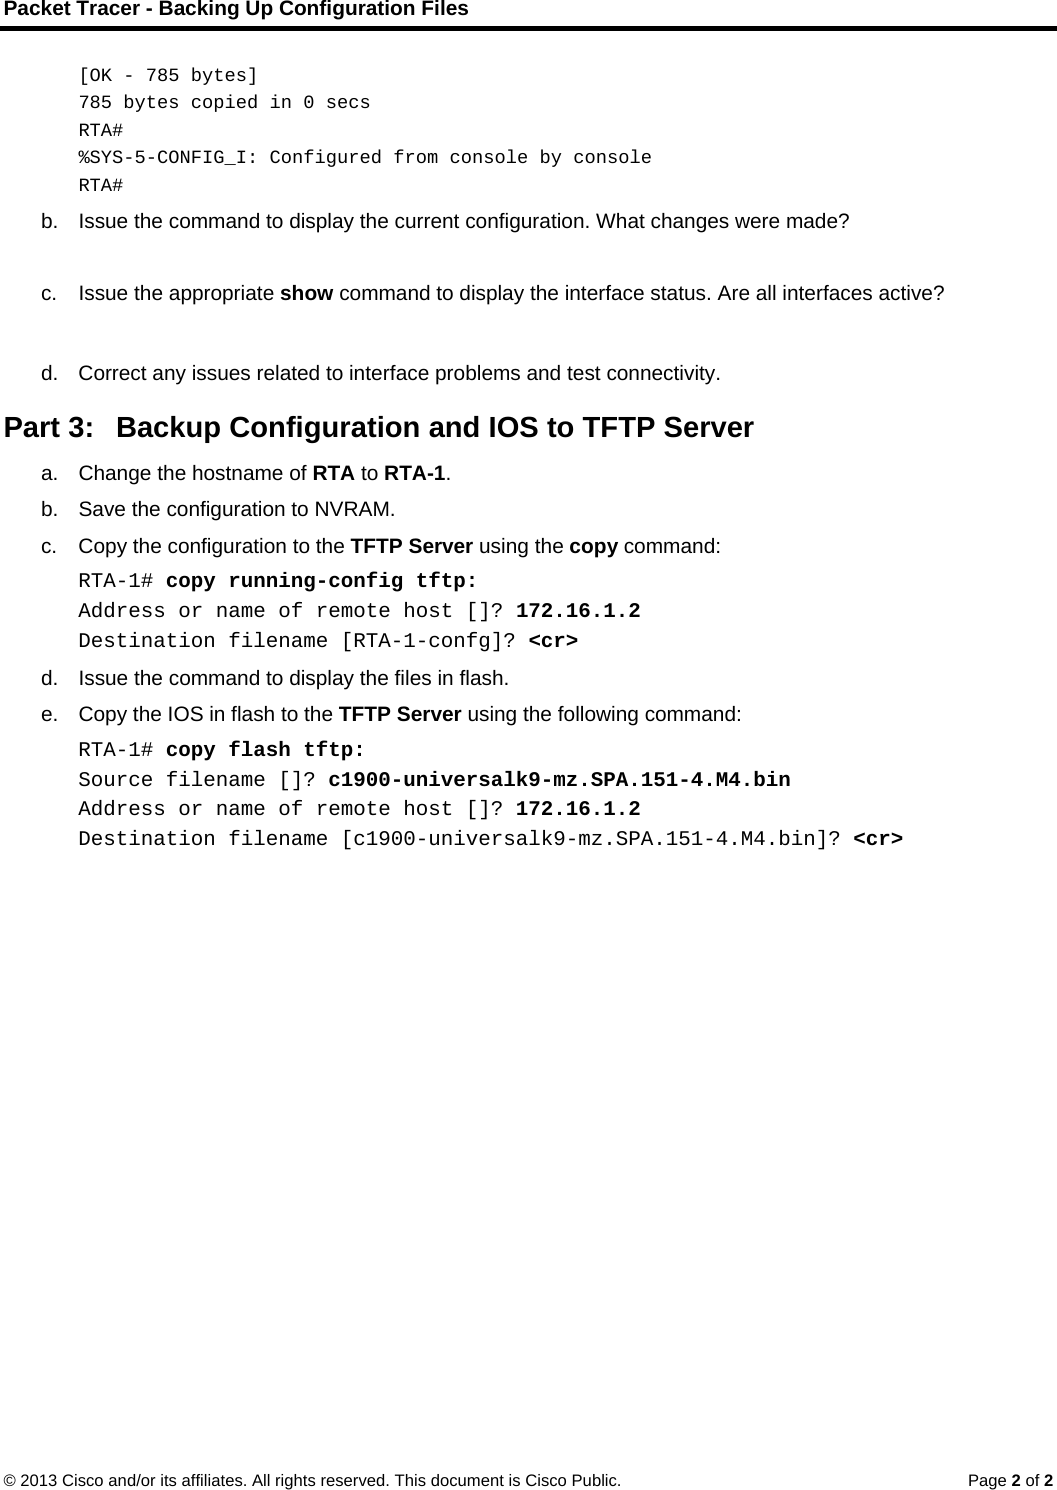 Page 2 of 2 - 10.3.1.8 Packet Tracer - Backing Up Configuration Files Instructions